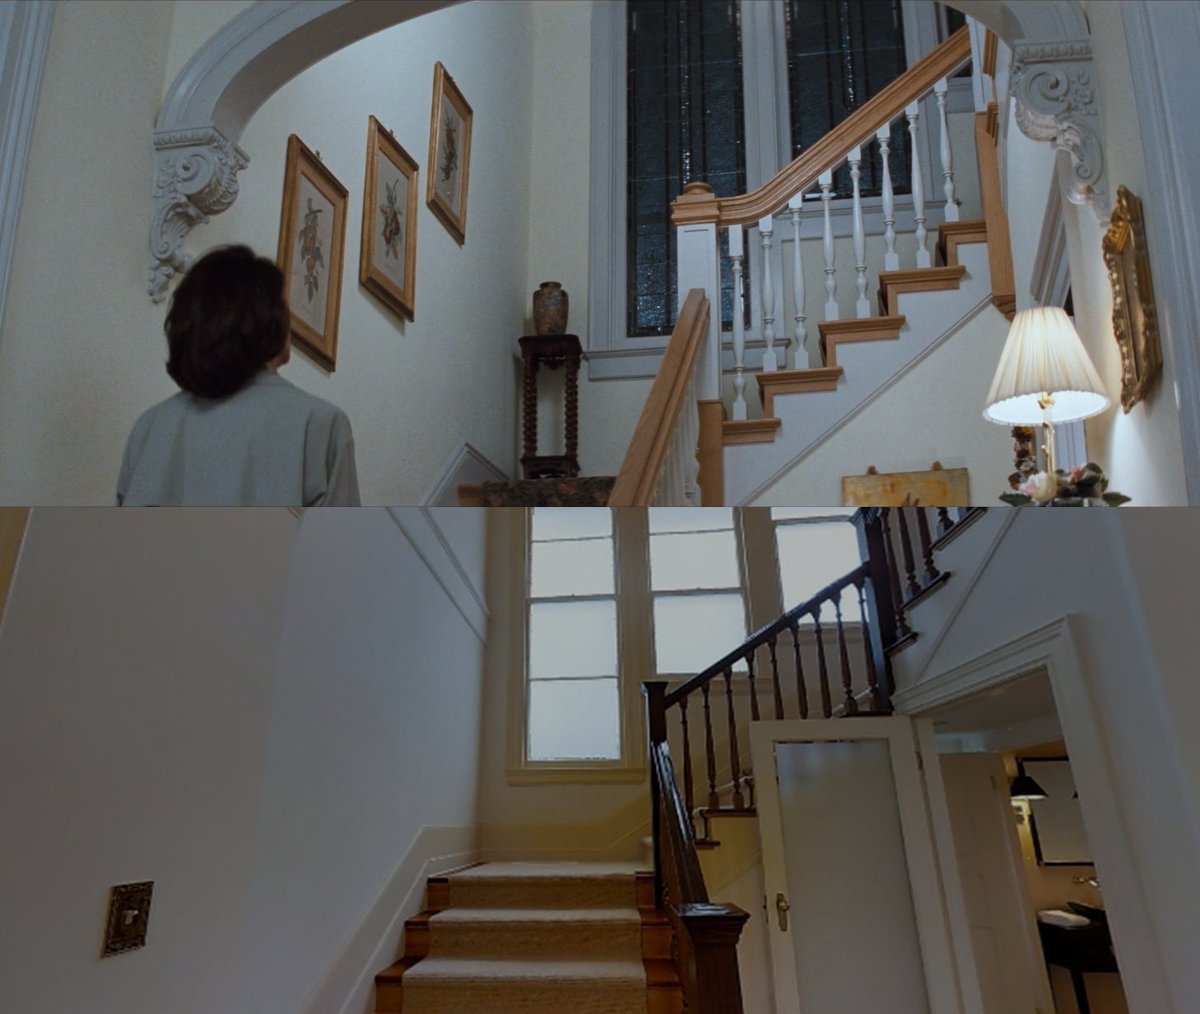 The ceiling arch treatment, trim, window sills? All gone. But hey, there's a bathroom just to the right we never saw in the movie!